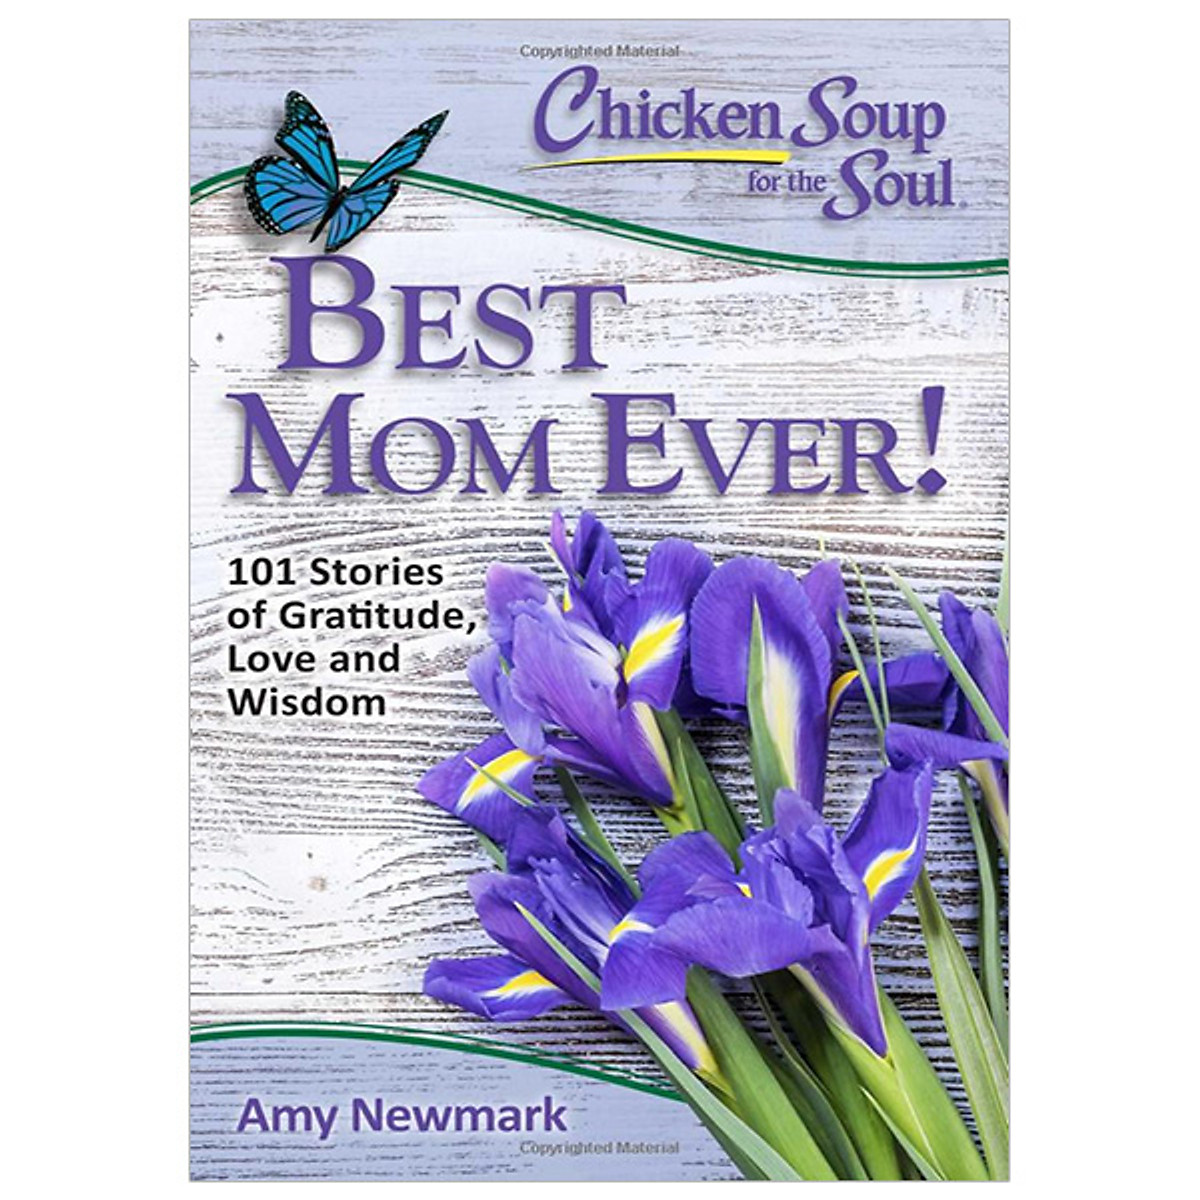 Chicken Soup For The Soul: Best Mom Ever!